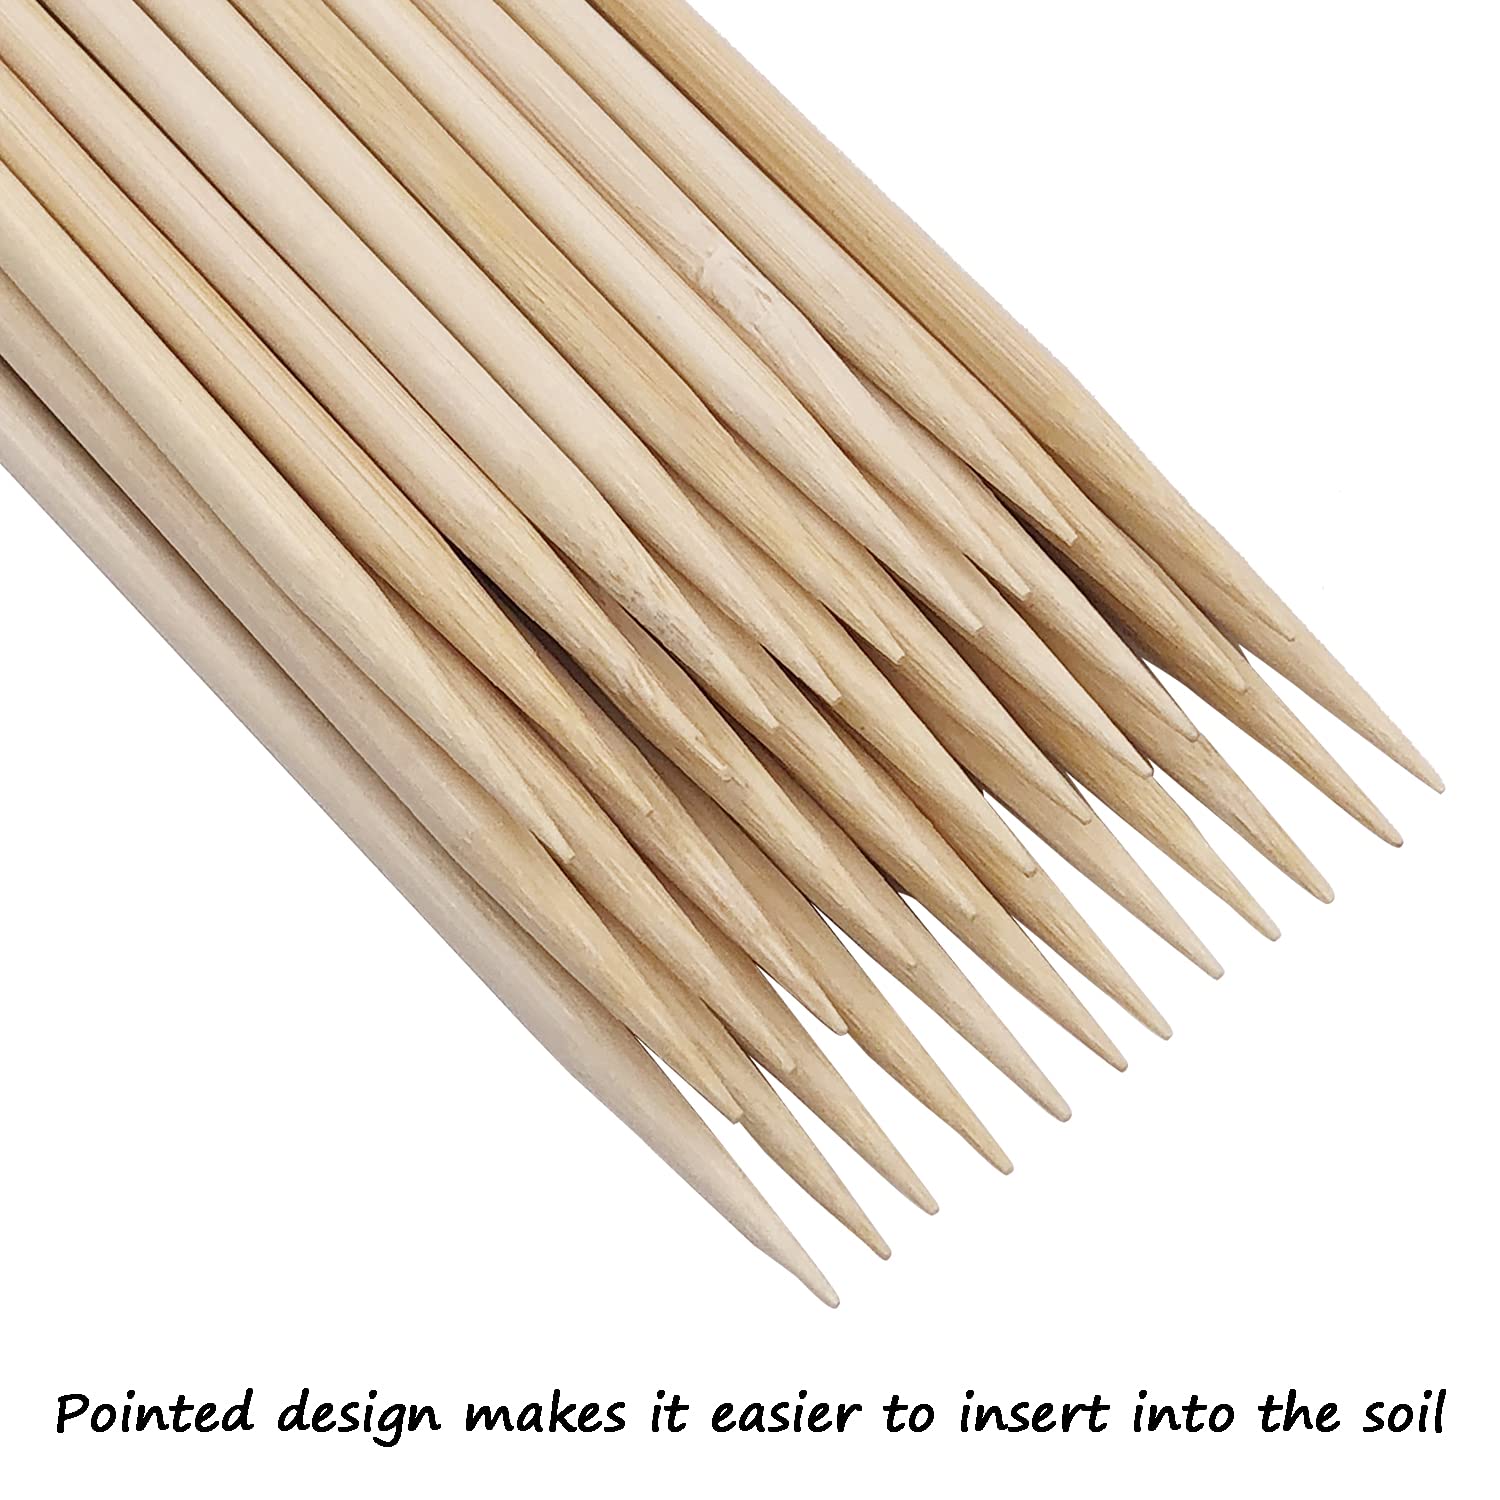 Bamboo Plant Stakes,HAINANSTRY Wood Plant Supports,Natural Bamboo Sticks for Plants/Floral/Potted Plant,Wooden Sign Posting Garden Sticks - 18 Inches 25 Pack